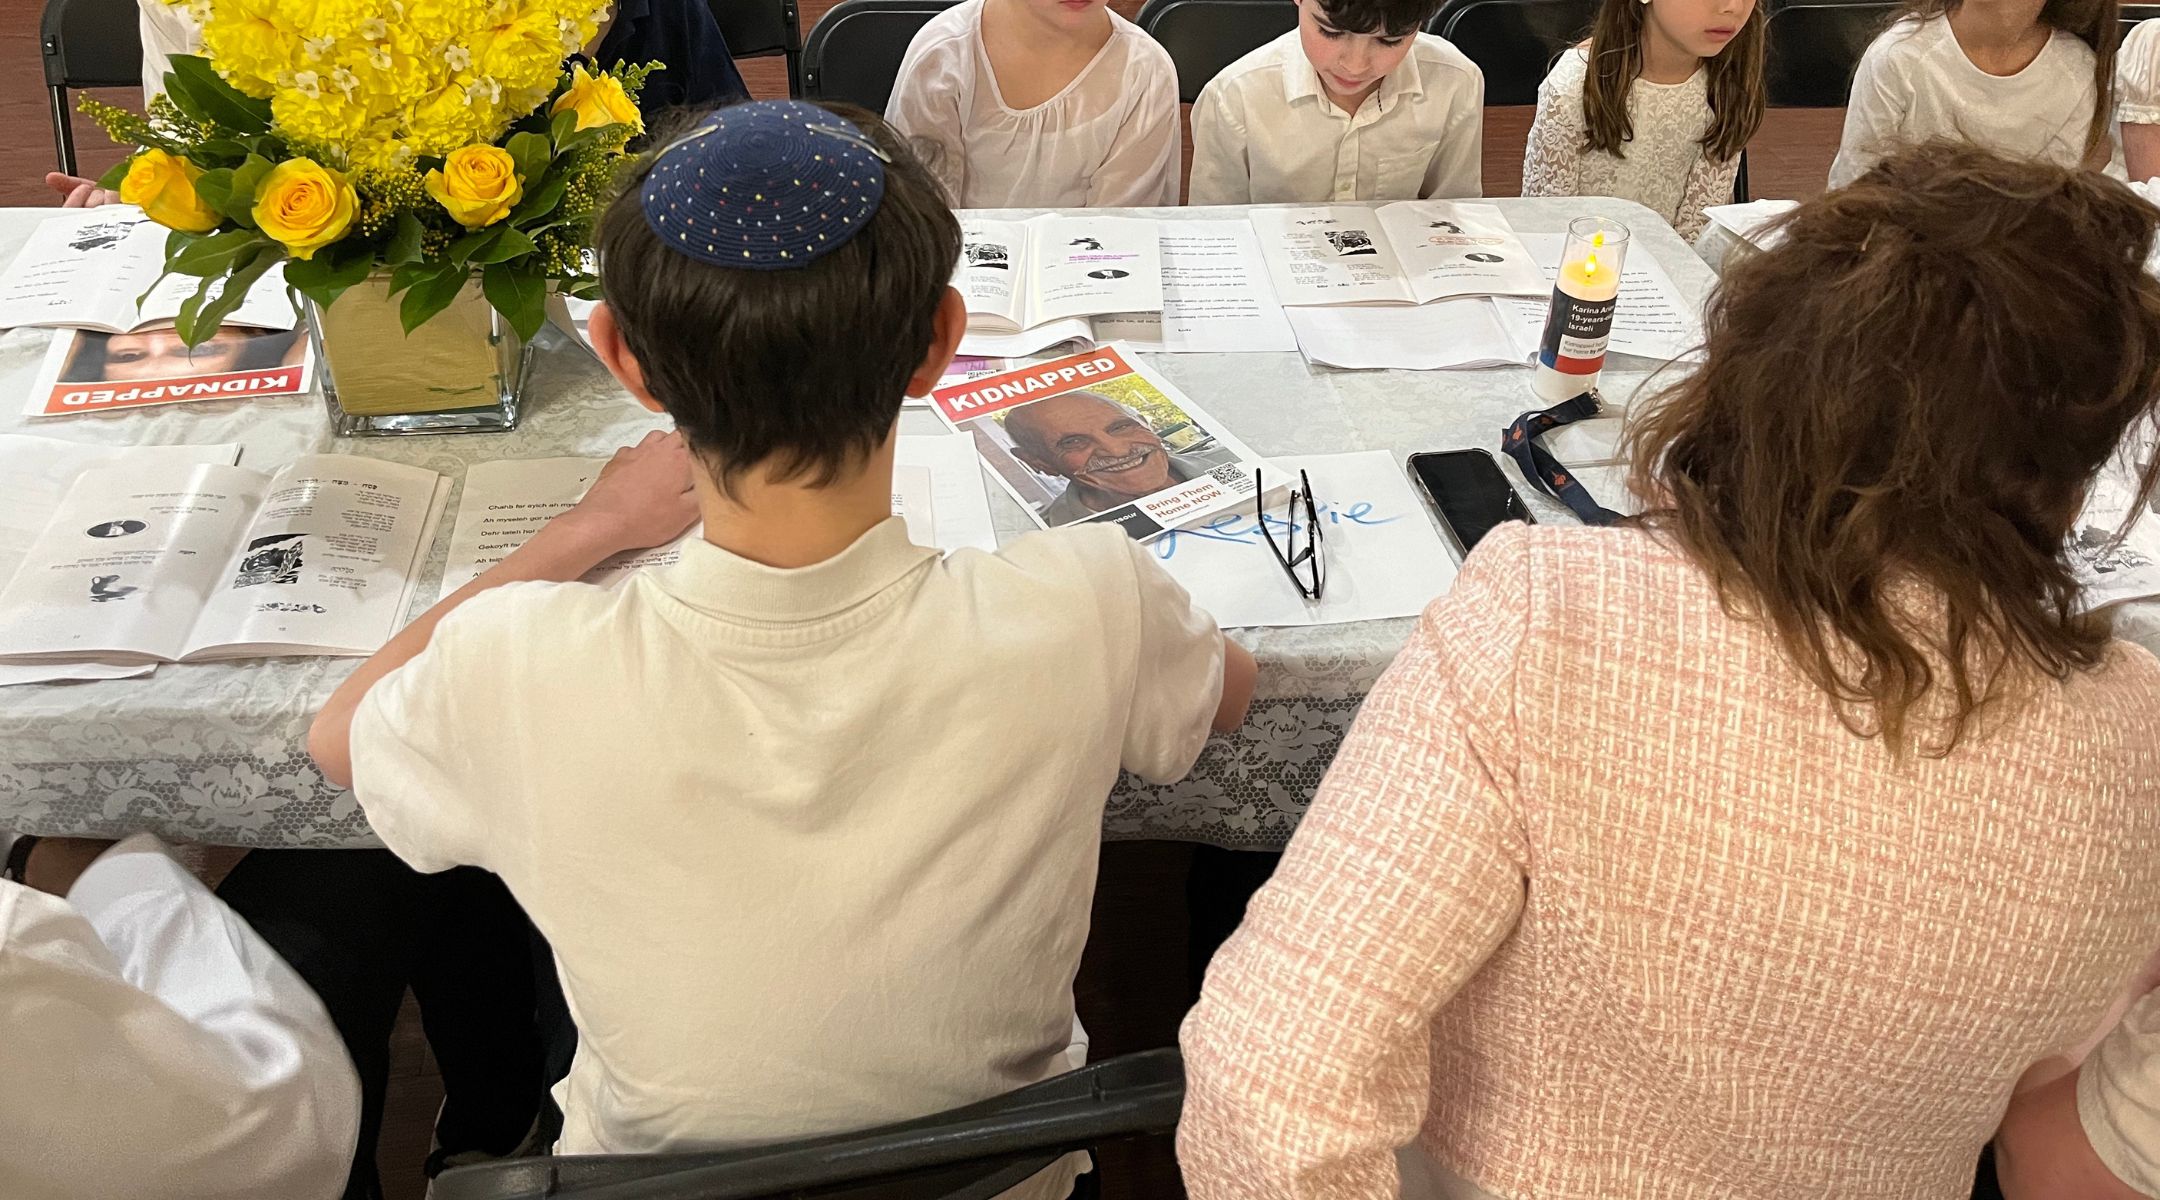 Children at a seder table